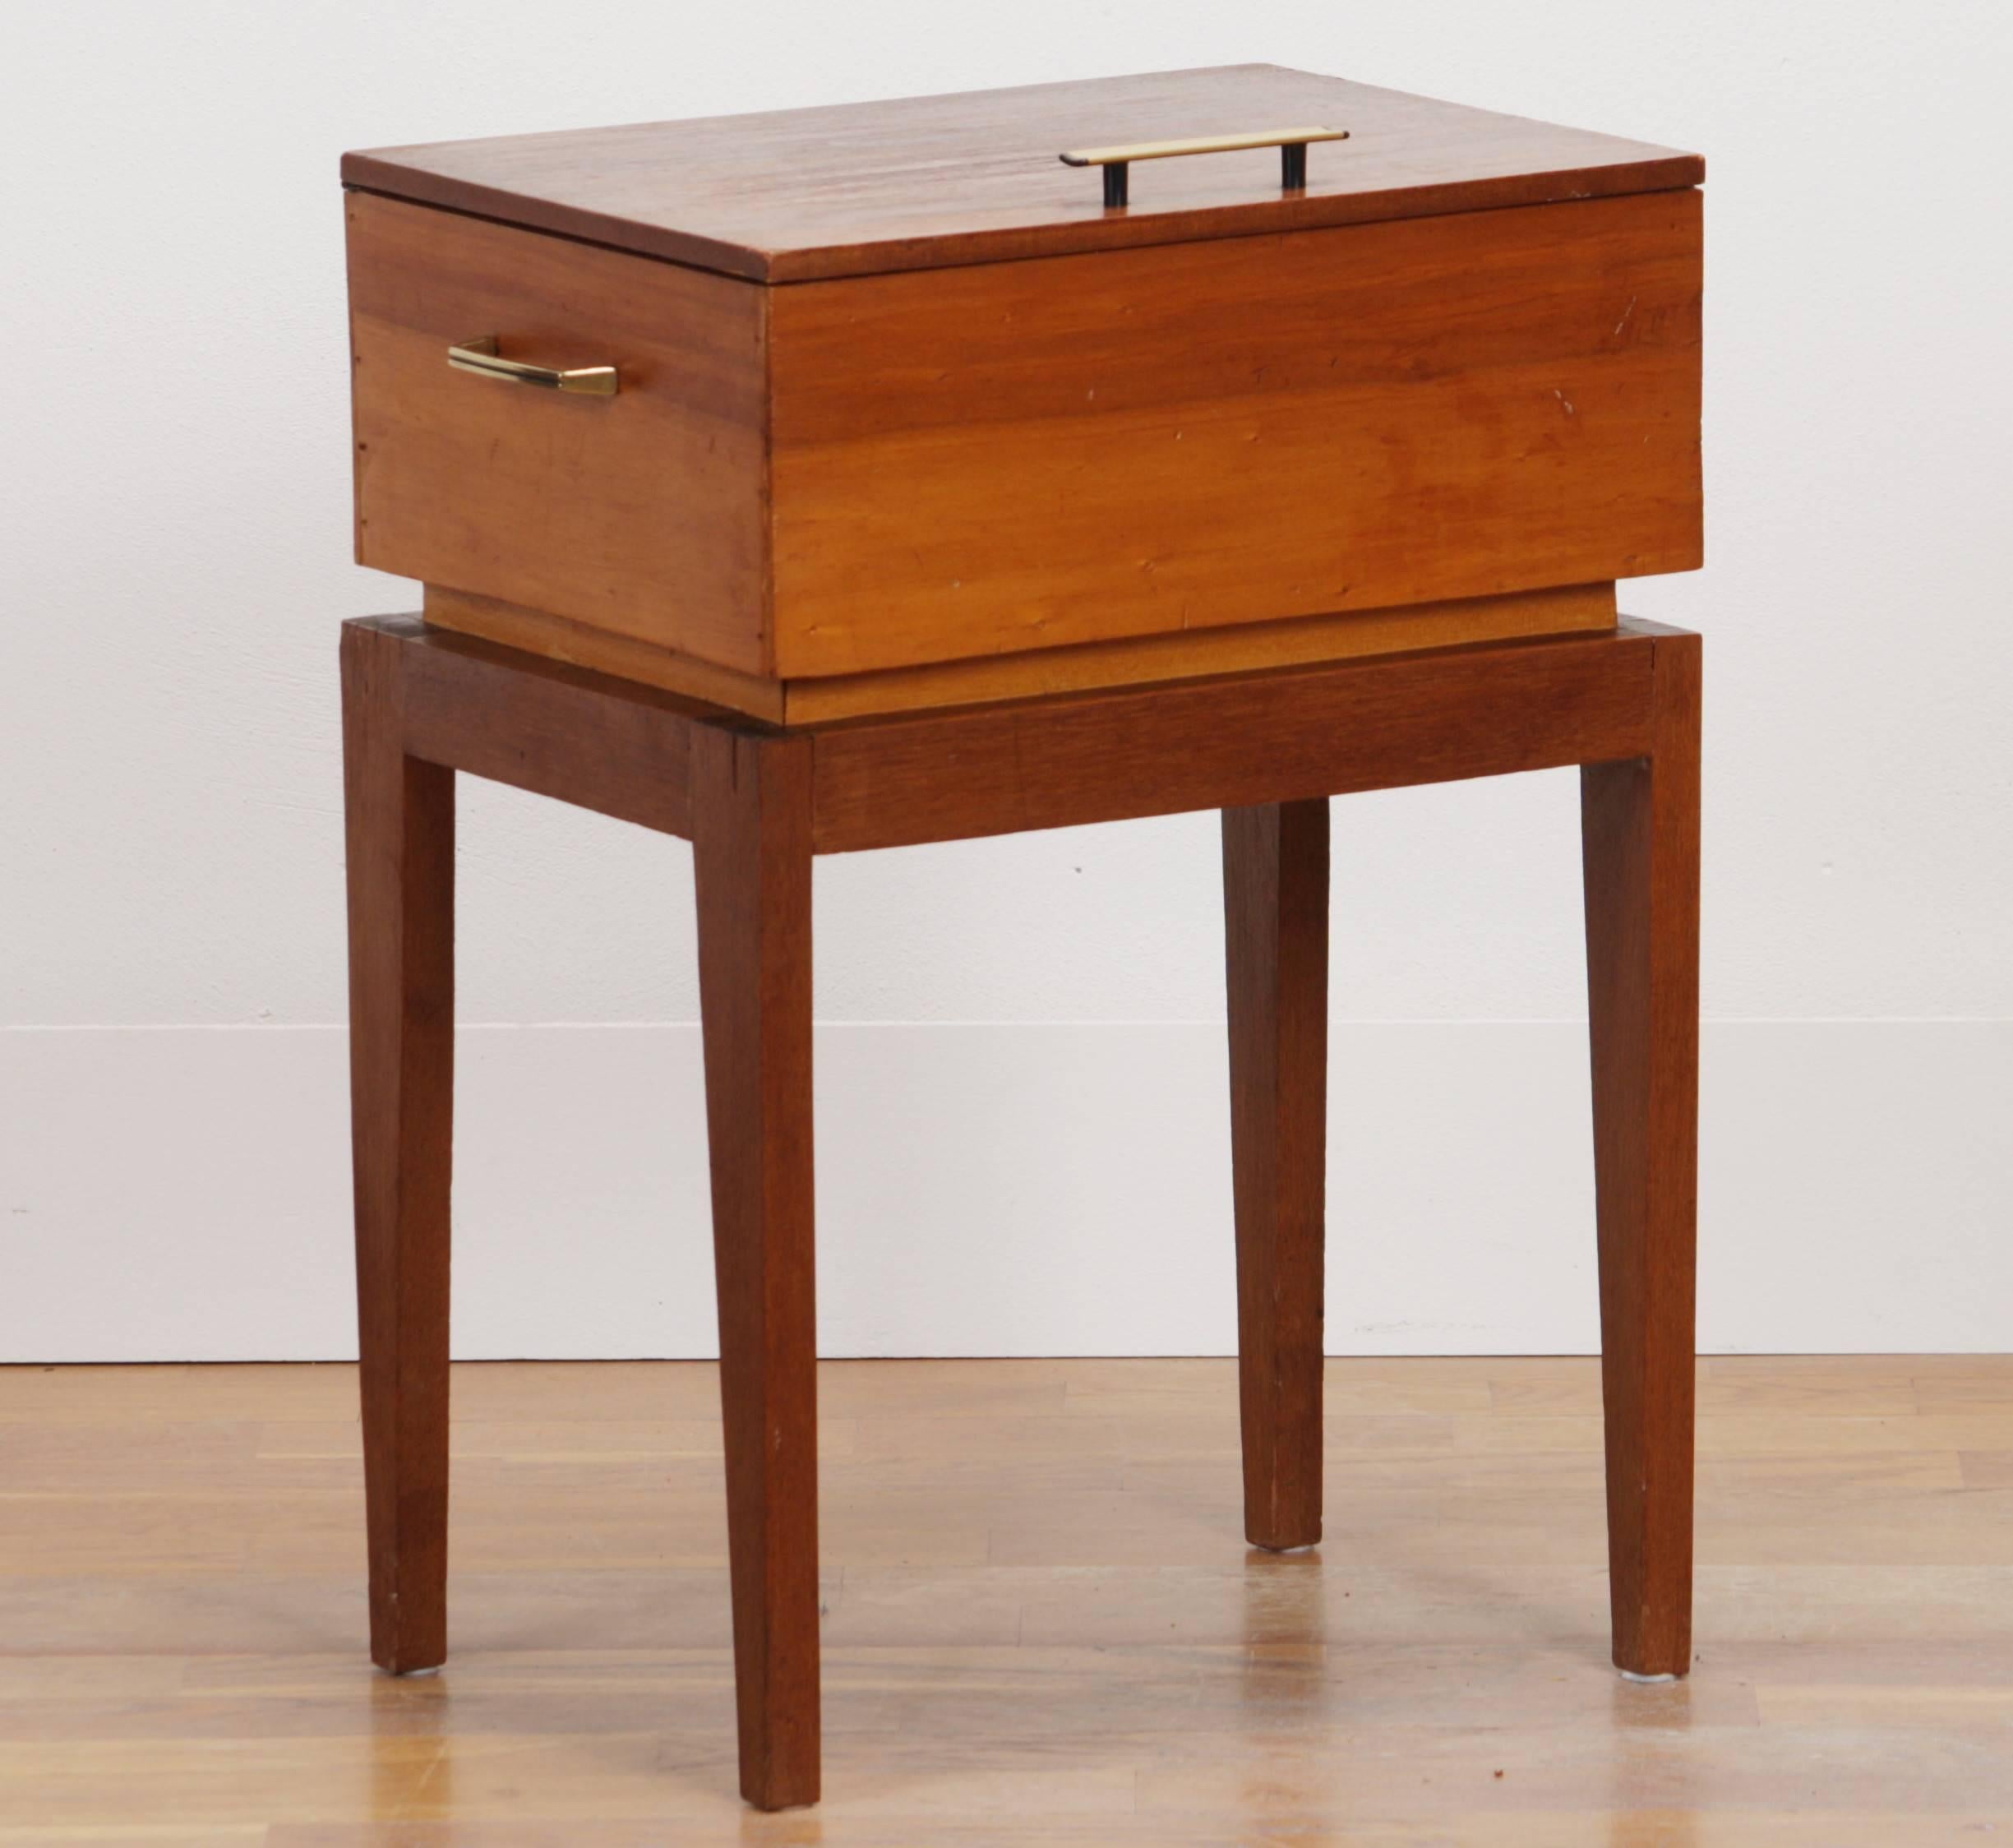 Beautiful sewing, side table.
This side table with storage is made from teak and pine and is in excellent vintage condition.
Period 1950s
Dimensions: H 56 cm, W 40 cm, D 32 cm.